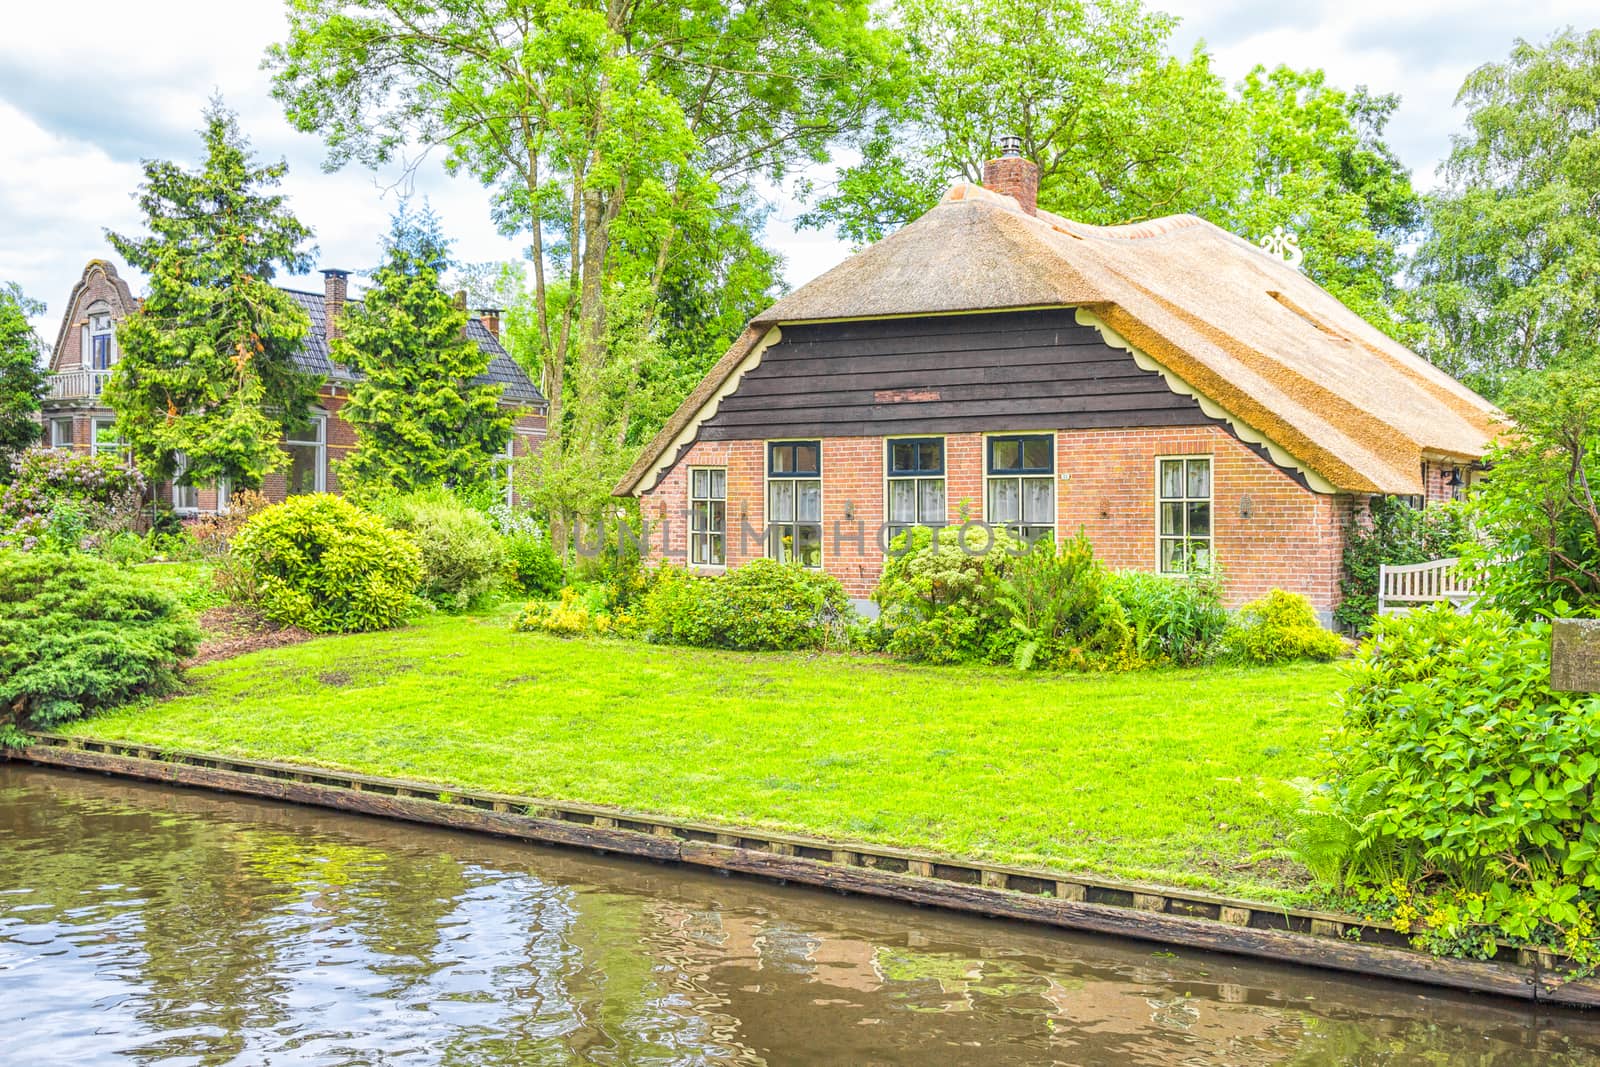 Typical Dutch houses and gardens in Giethoorn, The Netherlands by gianliguori